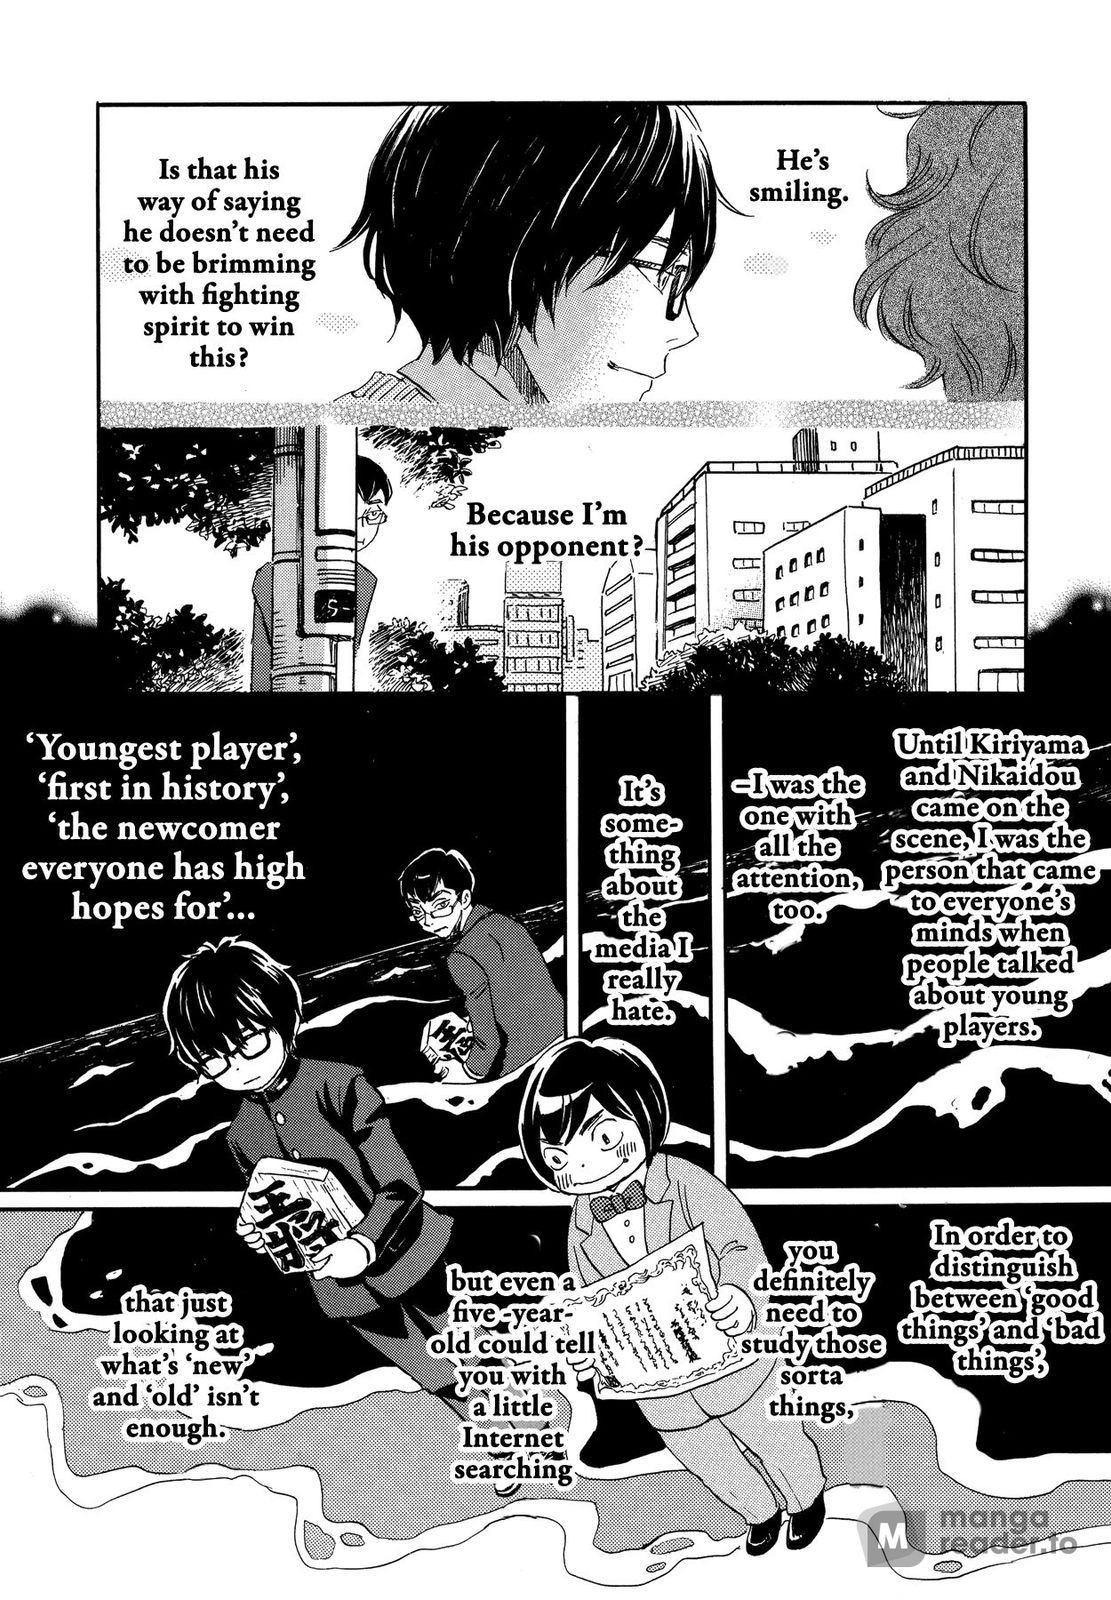 March Comes in Like a Lion, Chapter 156 Azusa Number 1 (Part 1) (EN) image 10